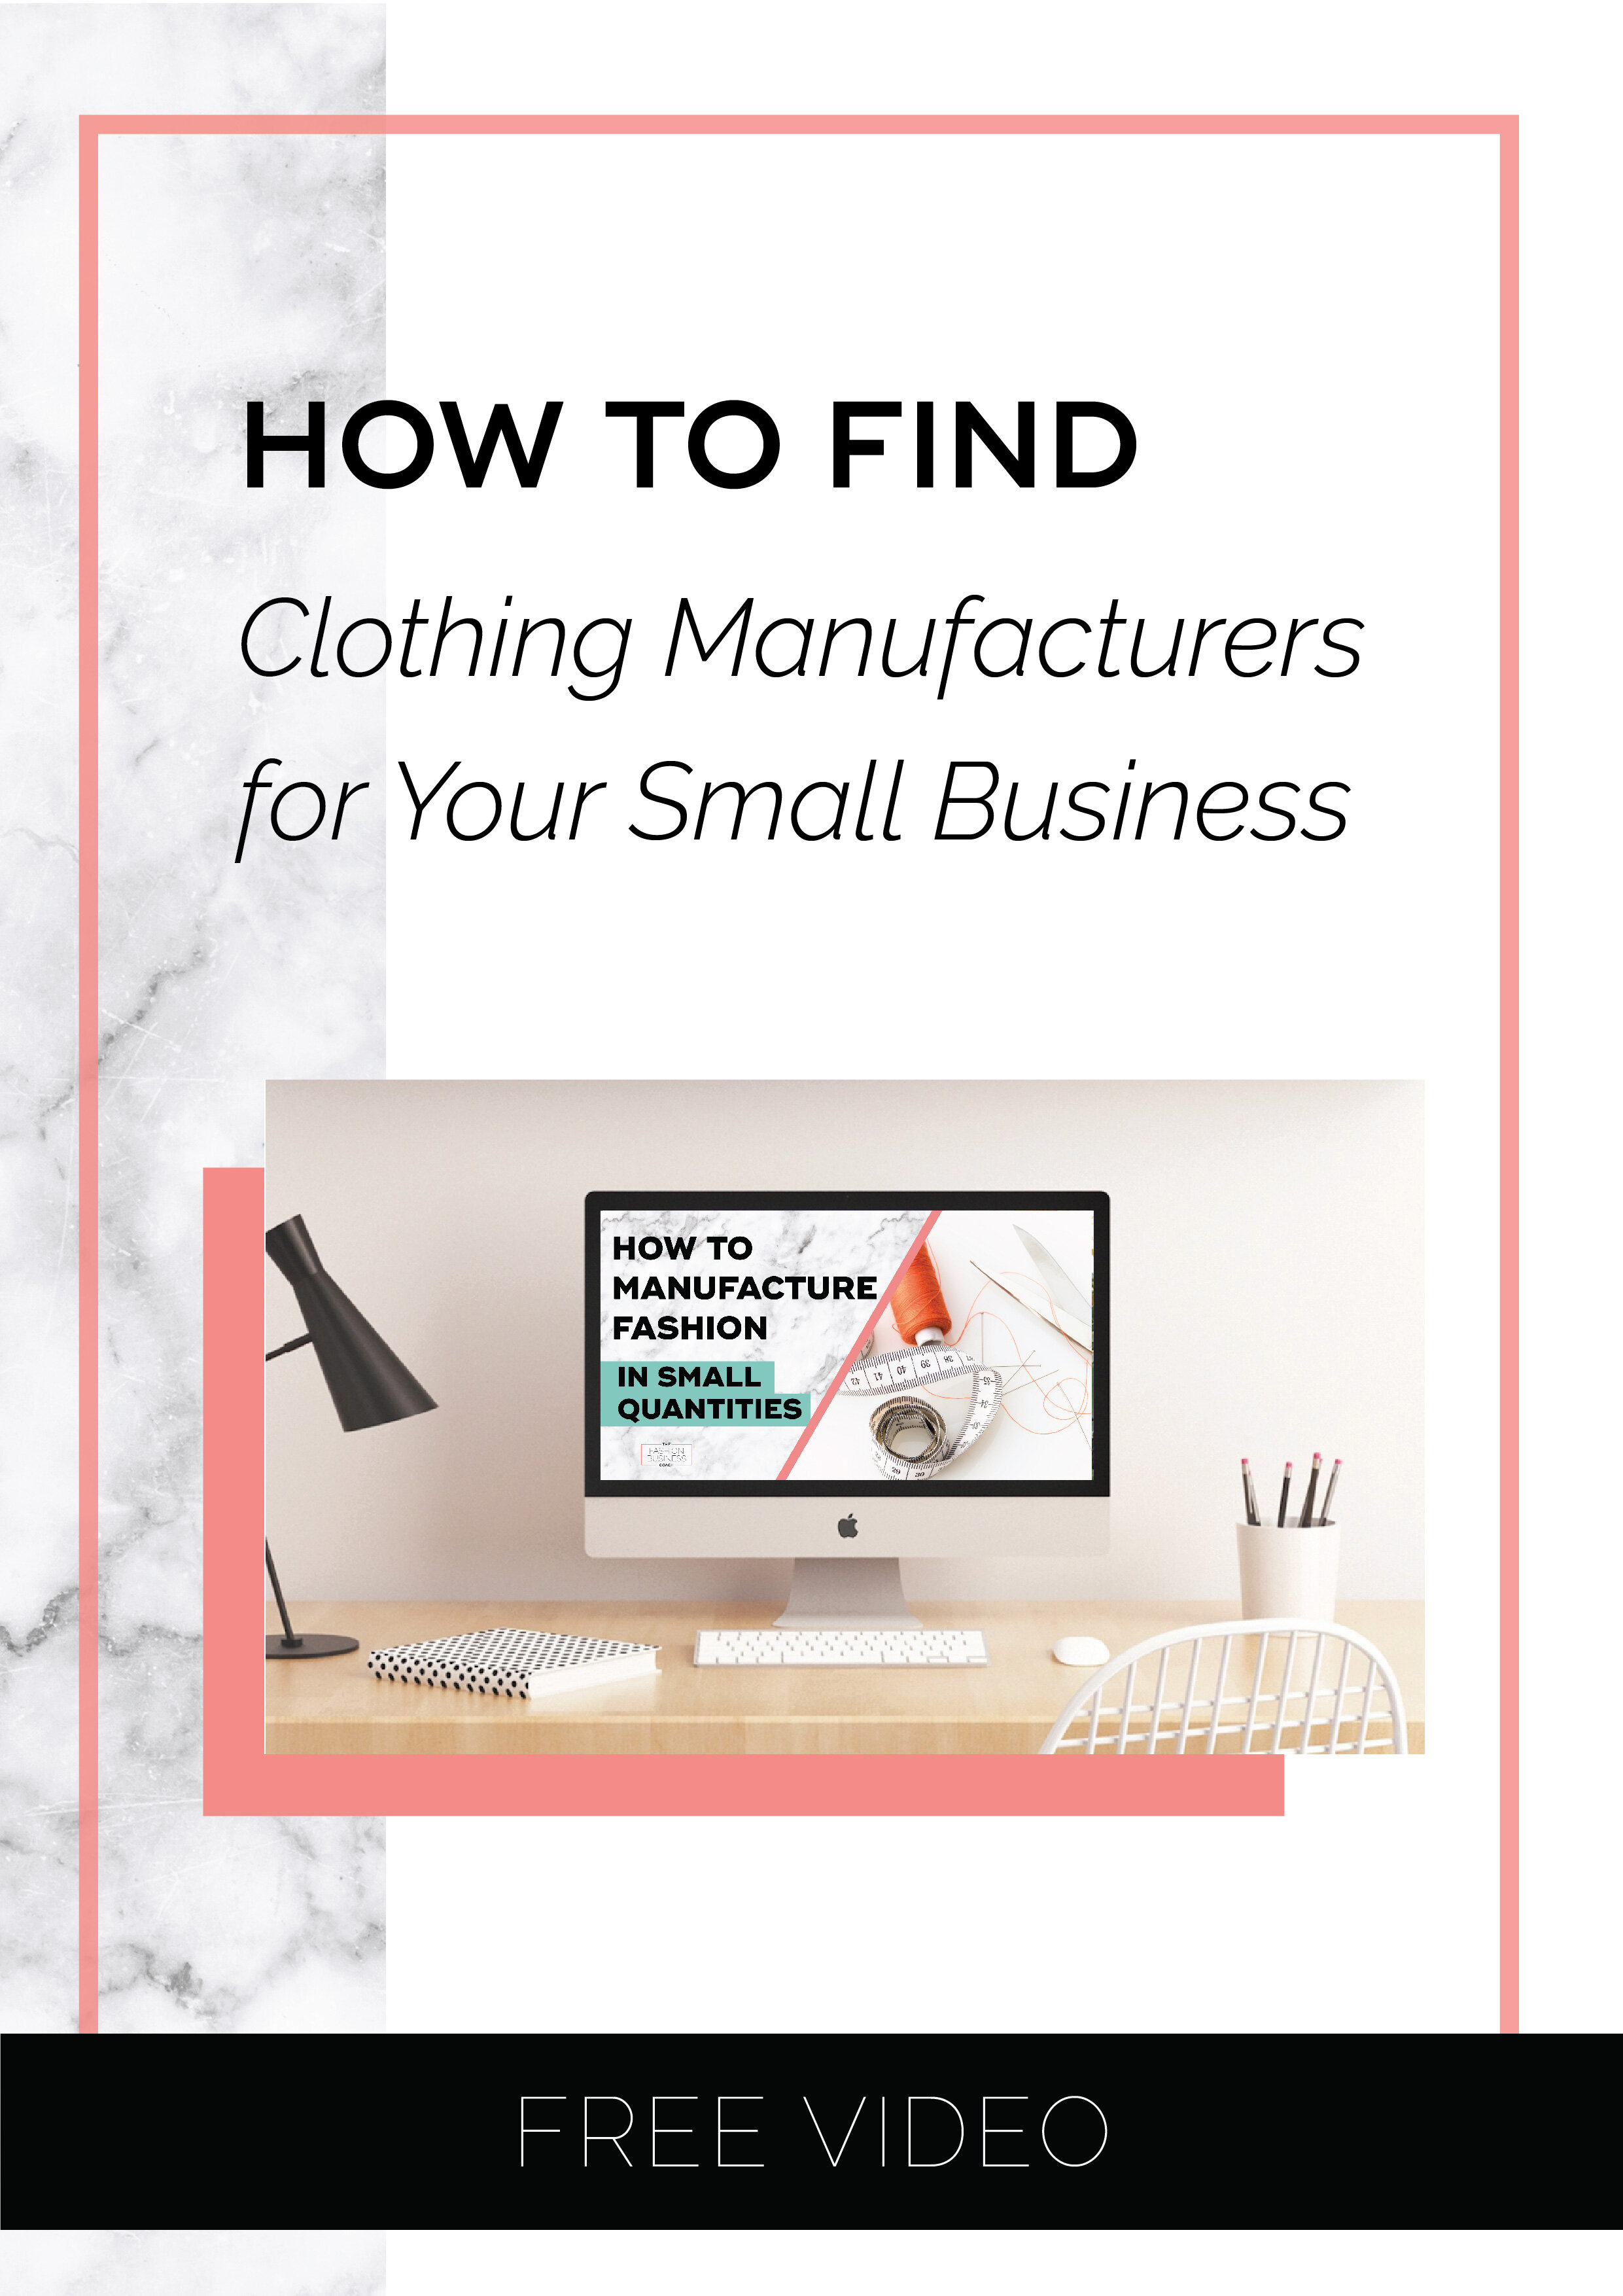 How to Find Clothing Manufacturers for Your Small Business1.jpg